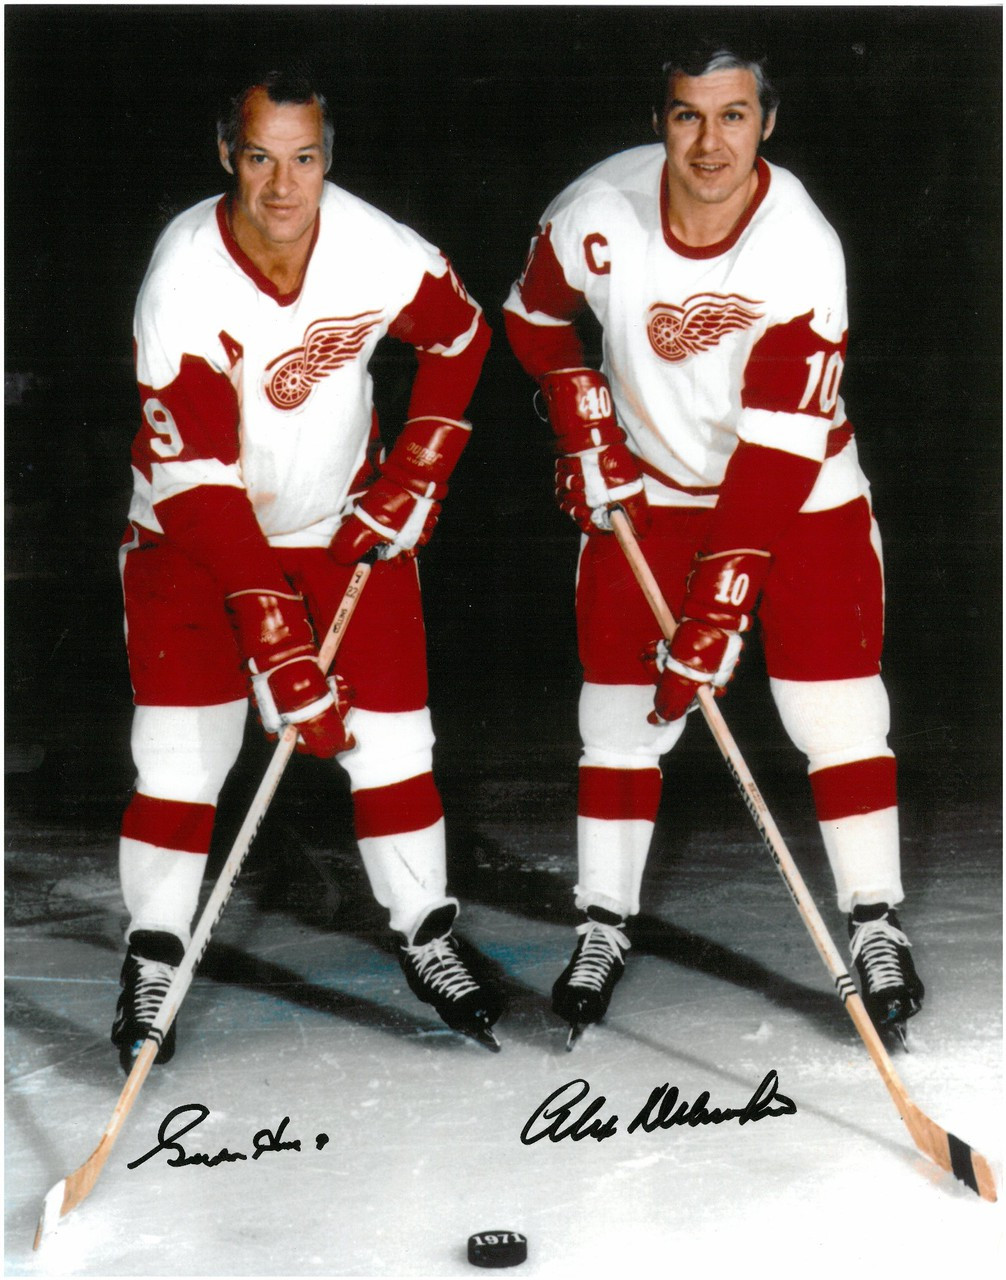 Detroit Red Wings Legends Gordie Howe and Frank Mahovlich